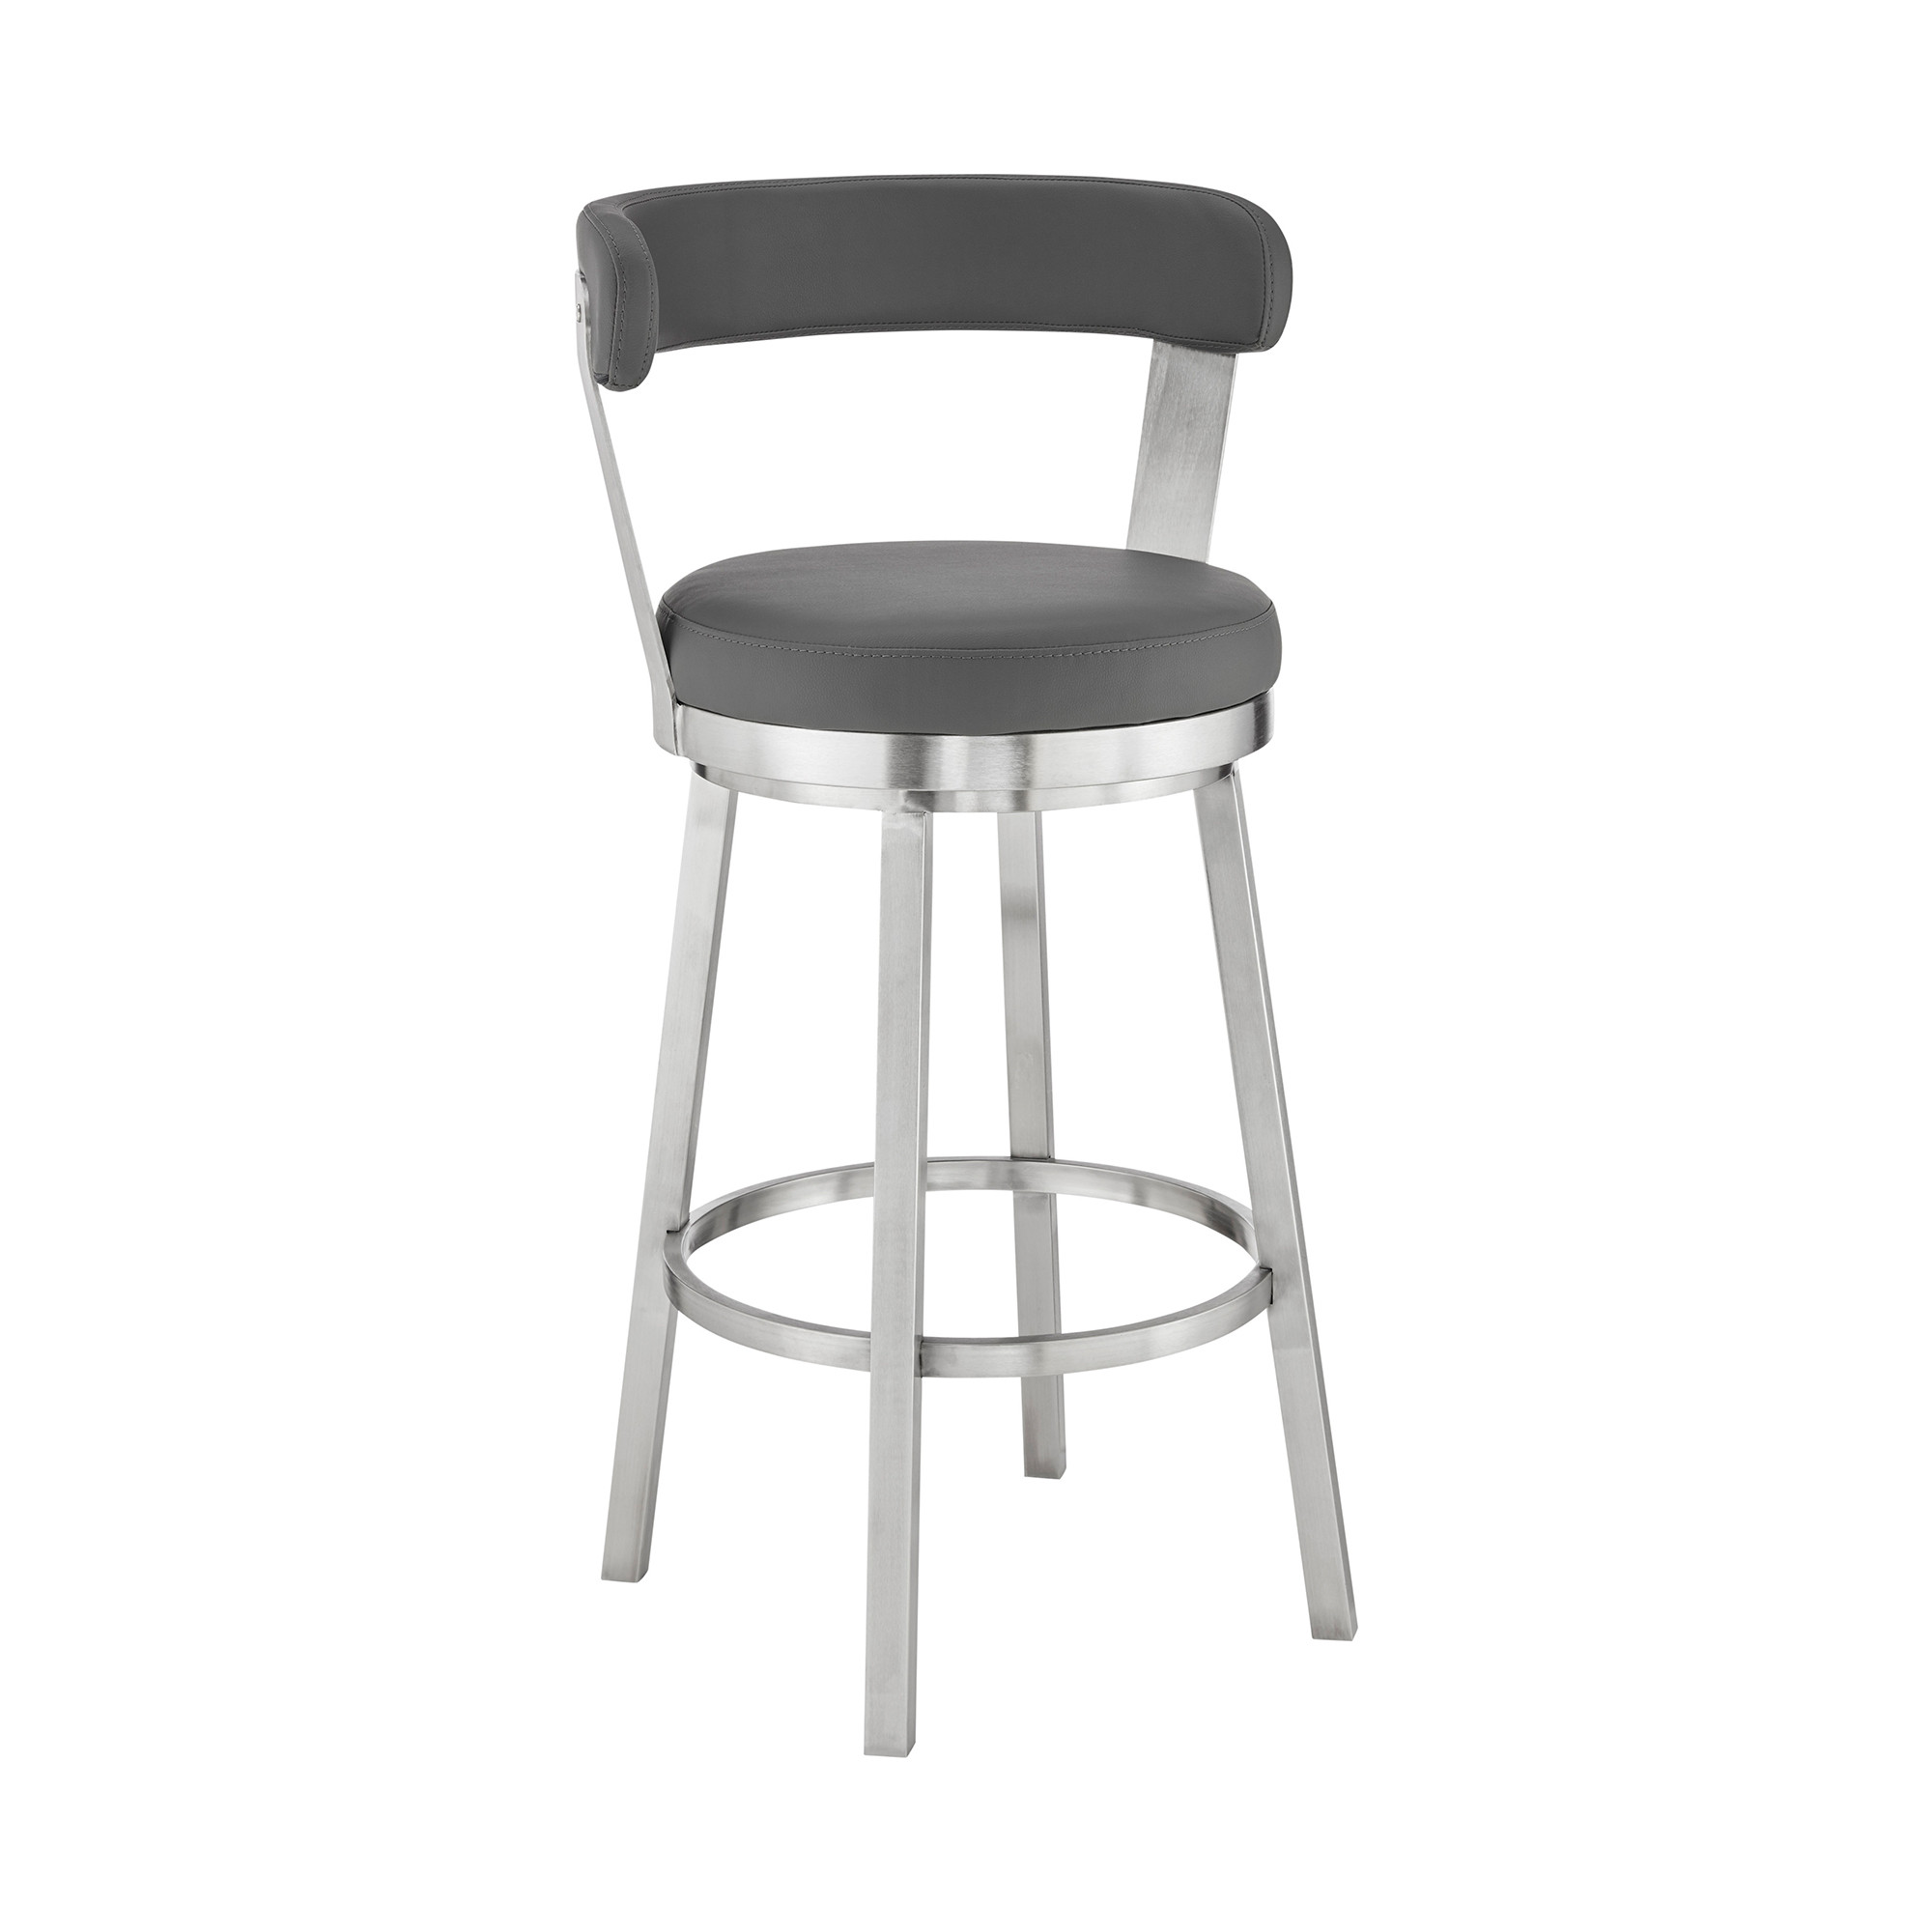 26" Chic Grey Faux Leather with Stainless Steel Finish Swivel Bar Stool